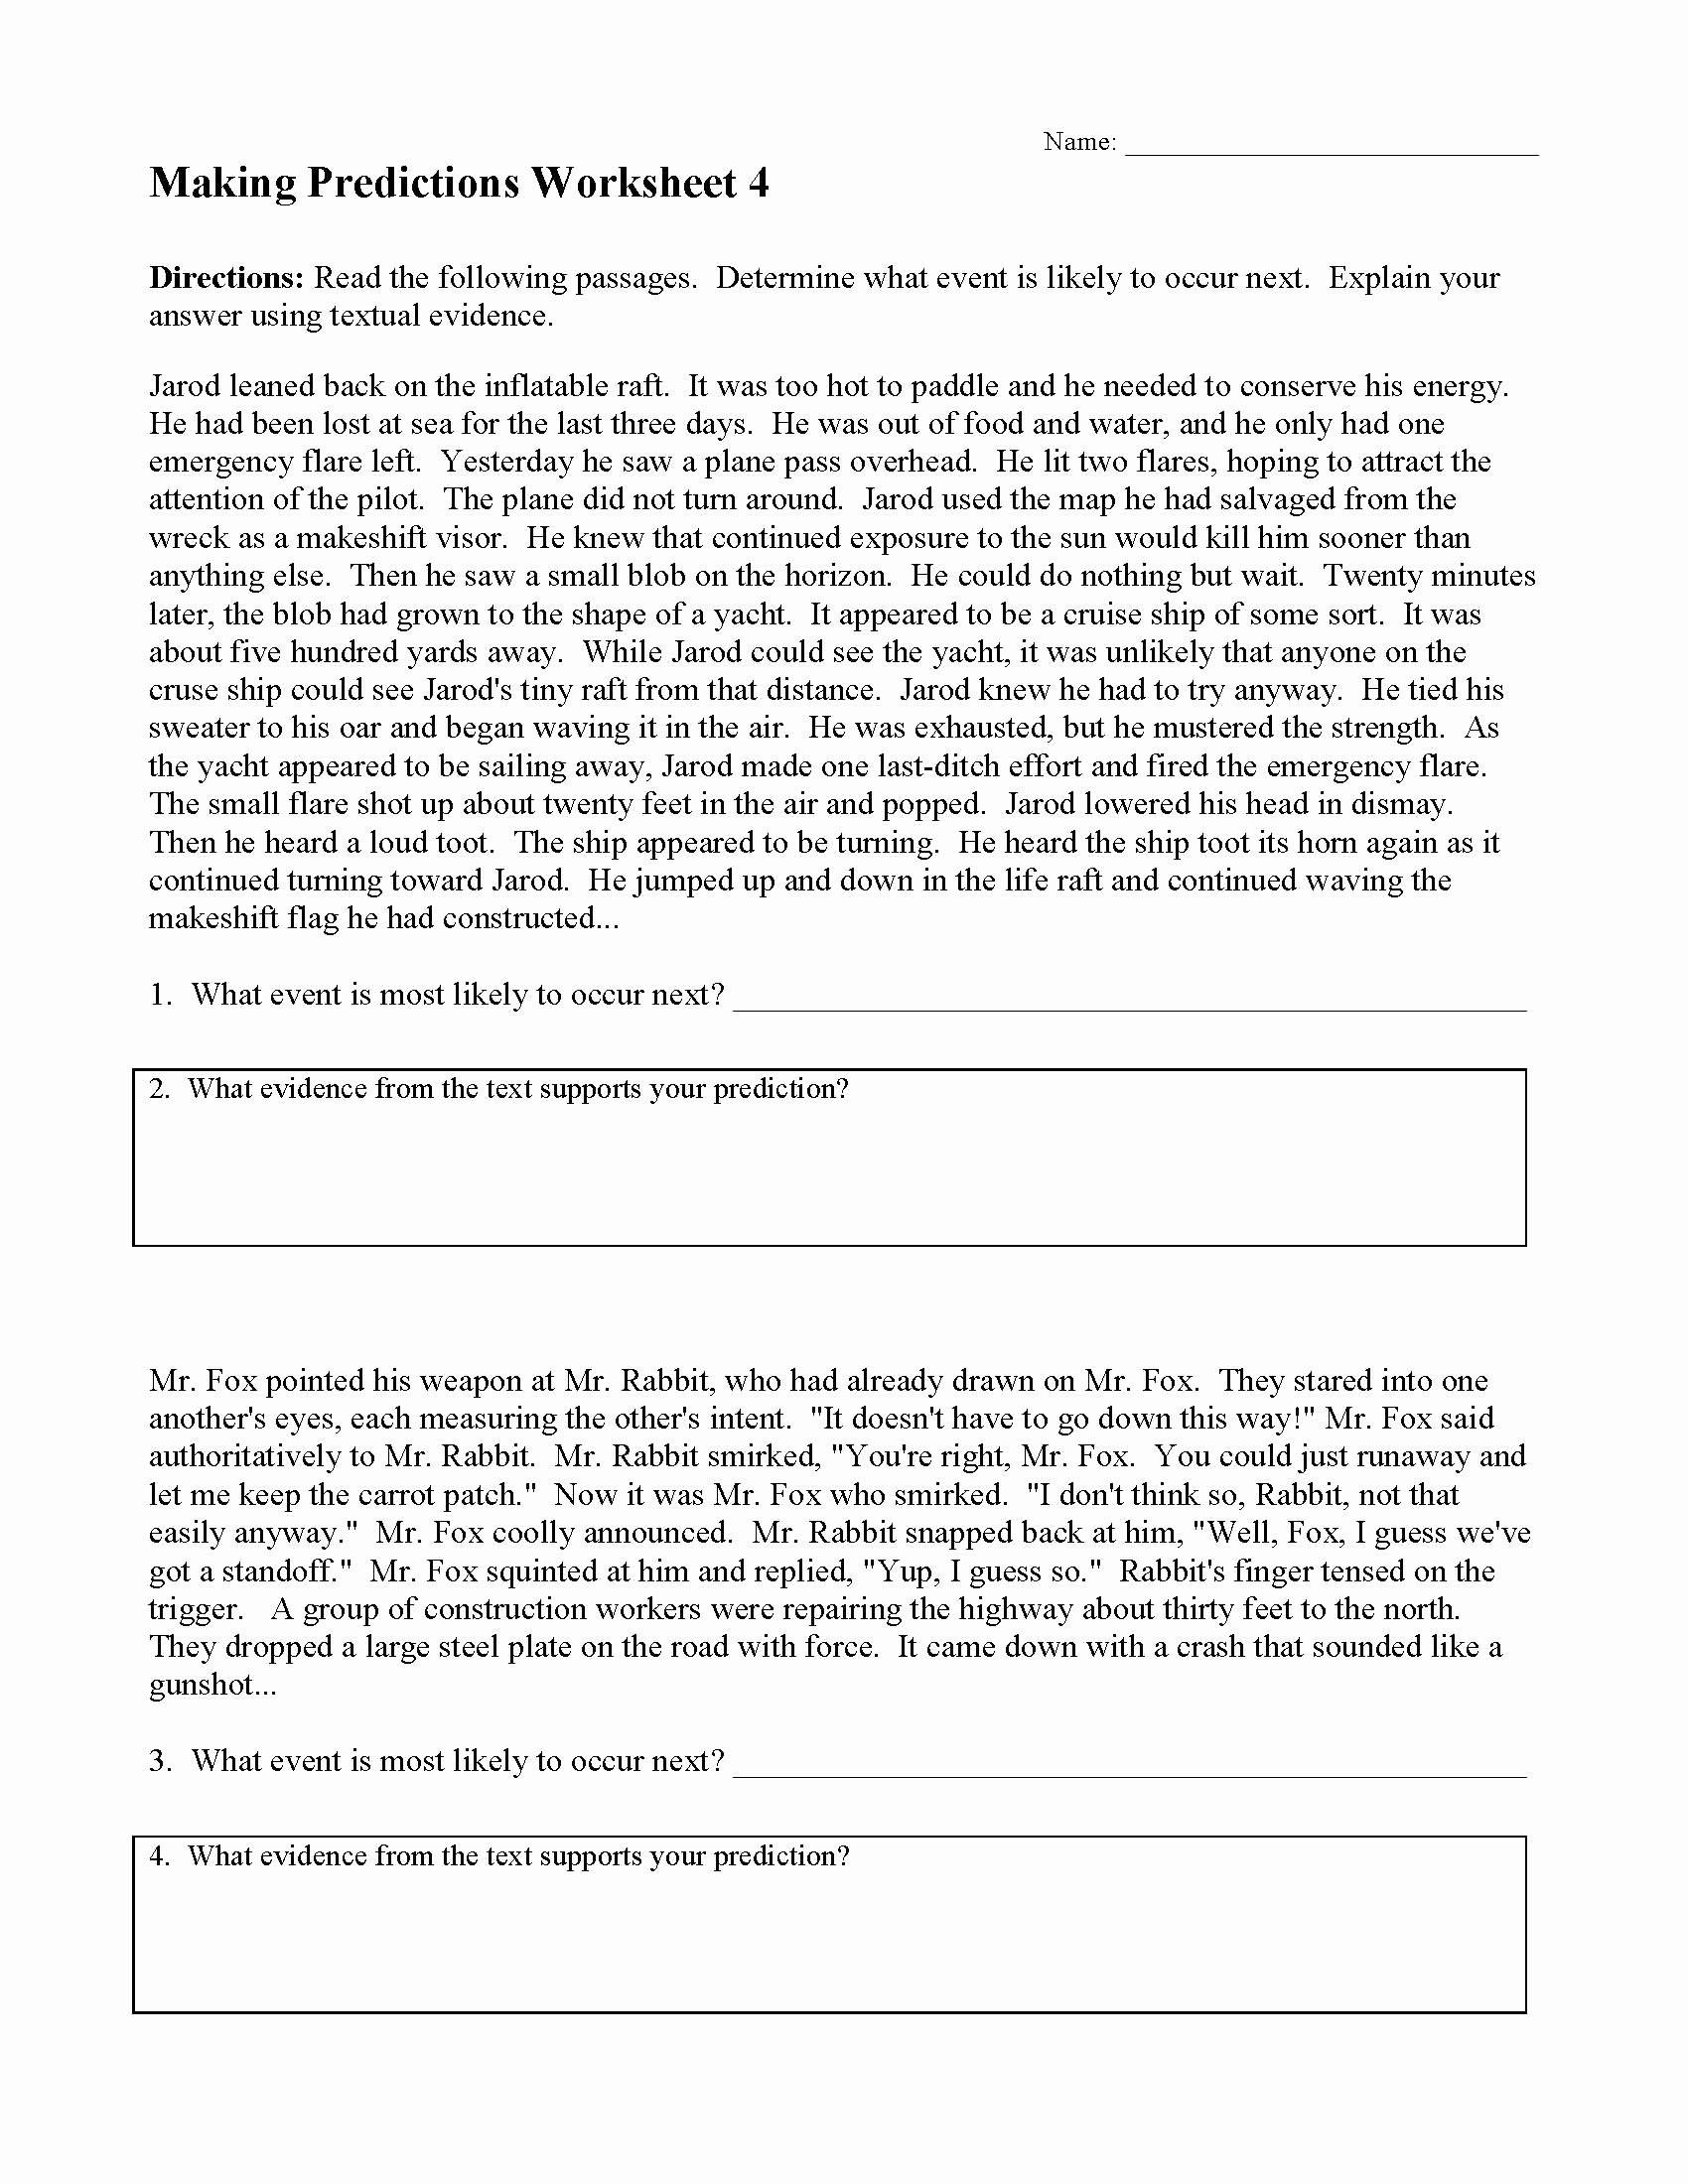 Making Predictions Worksheets 2nd Grade Best Of Making Predictions Worksheets 2nd Grade